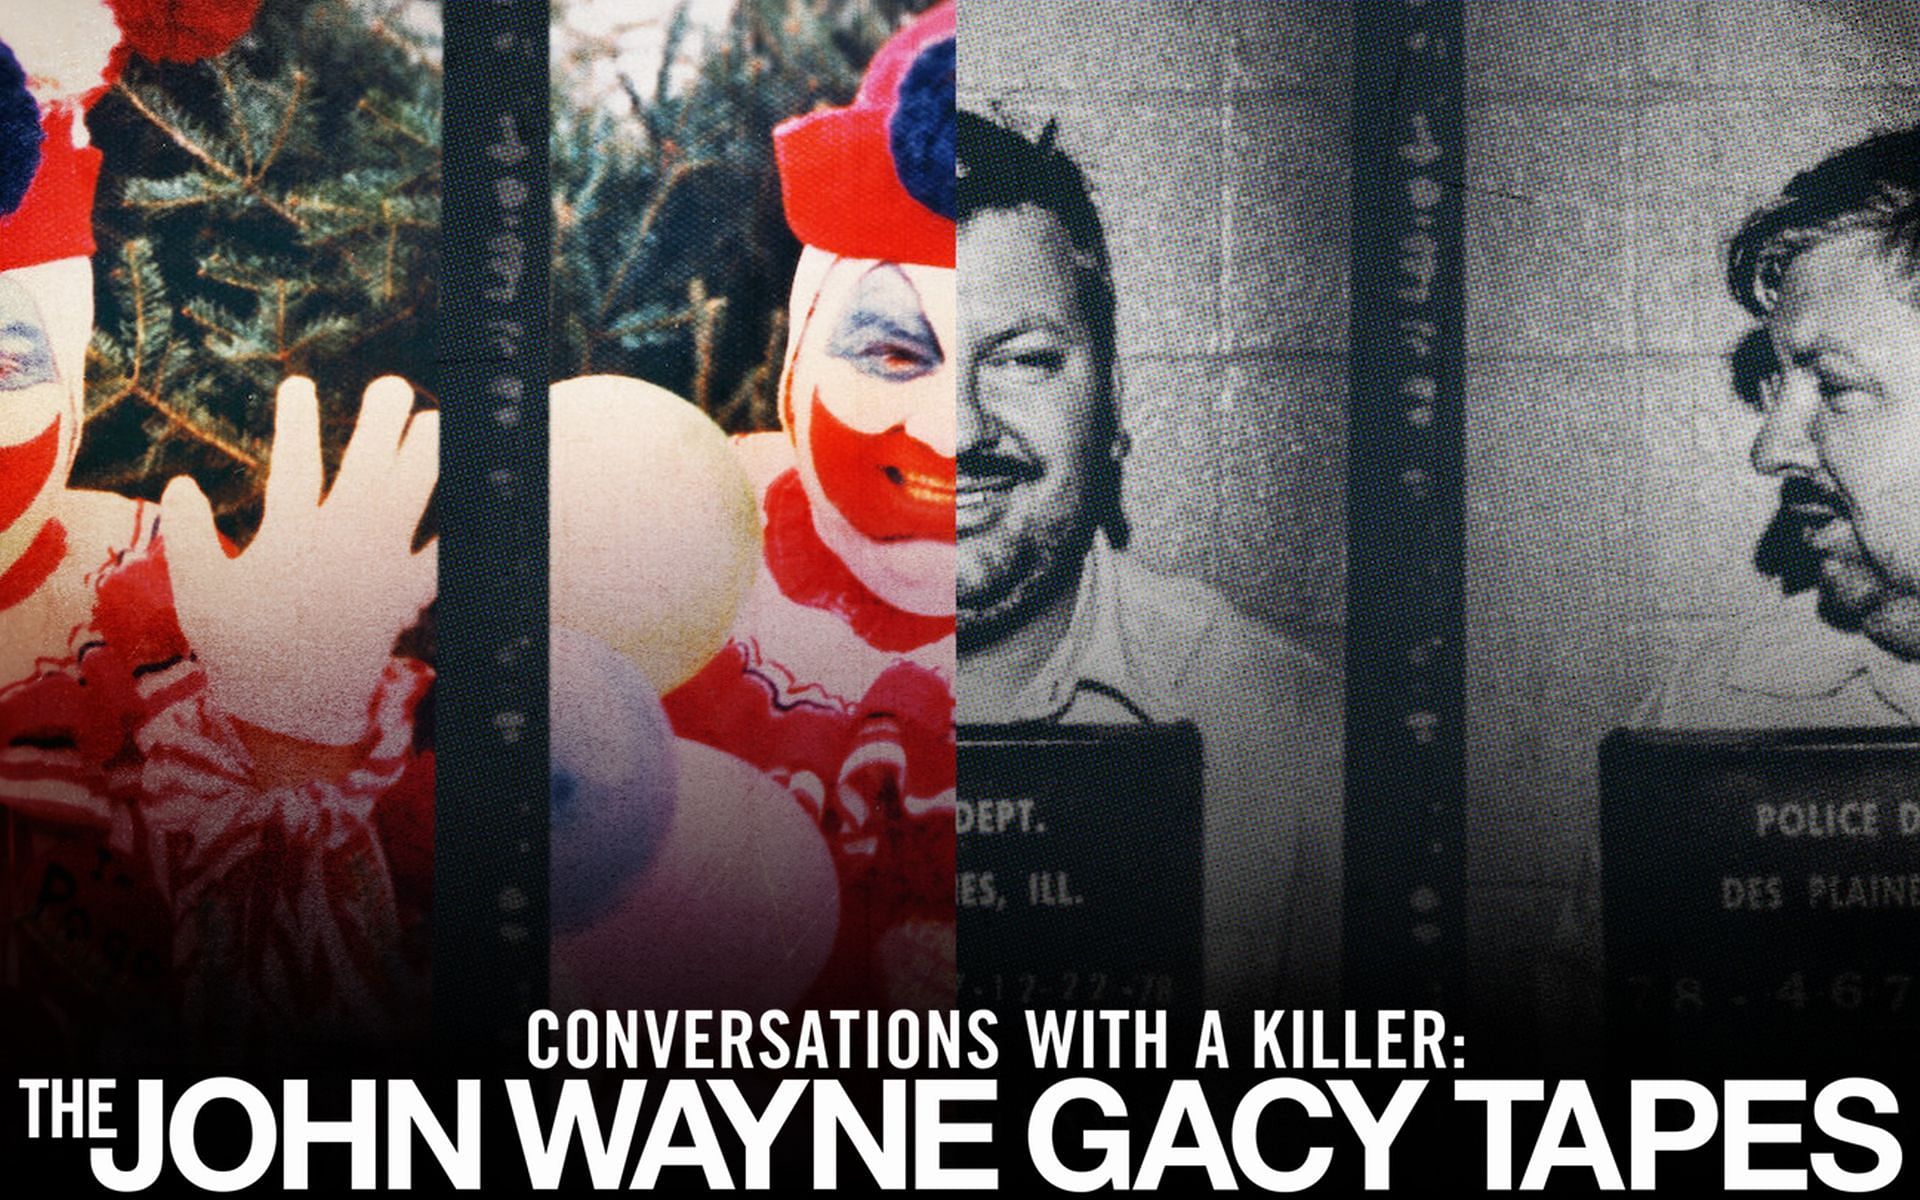 What were John Wayne Gacy's last words? Netflix's Conversations with a